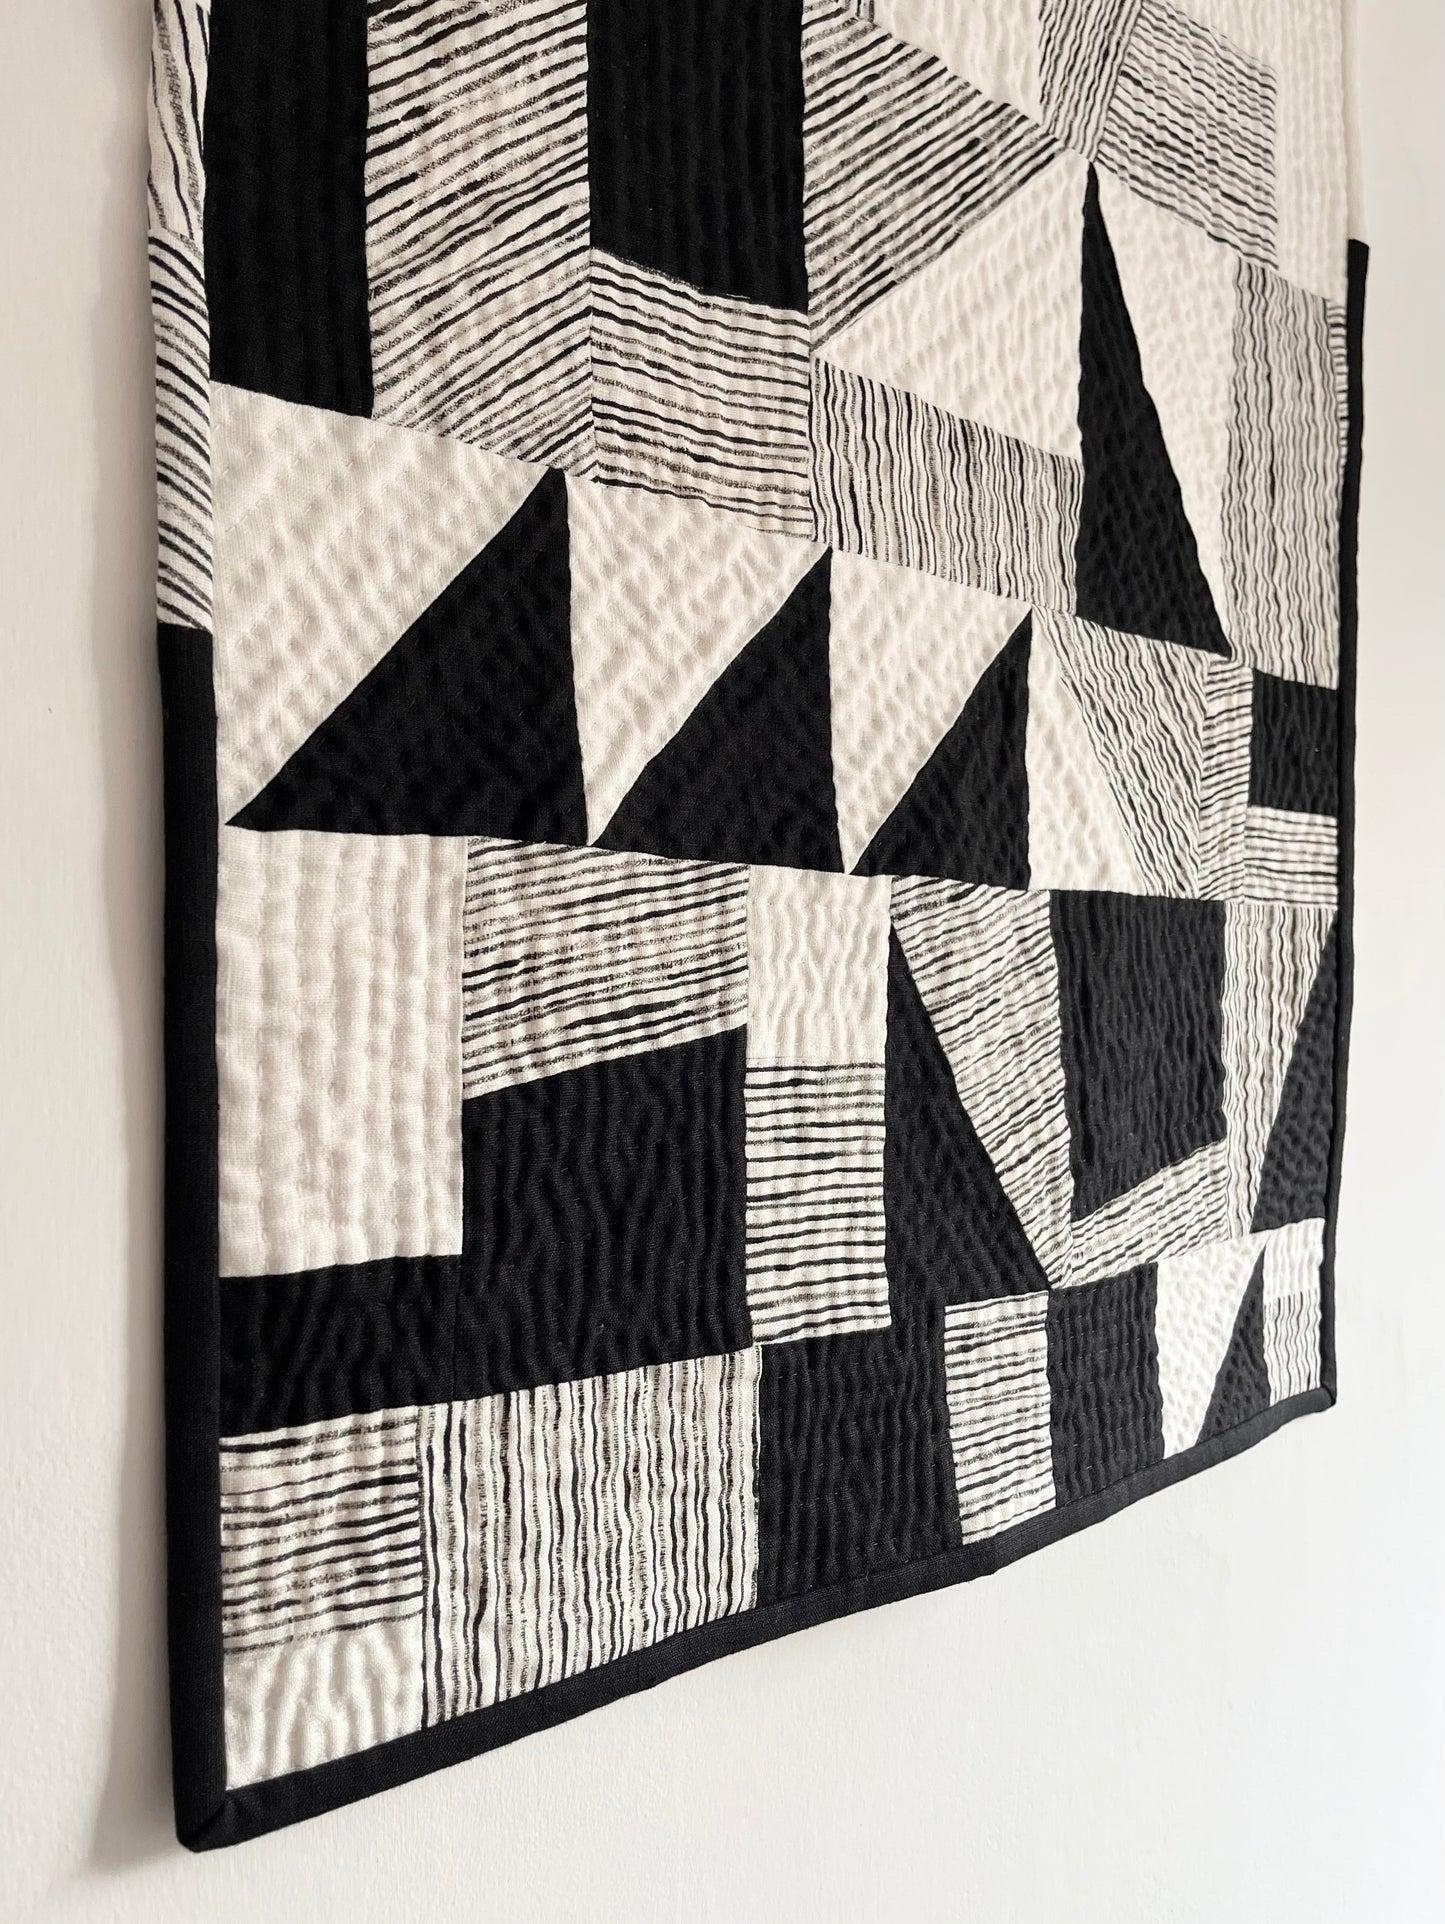 WALL QUILT - LINES